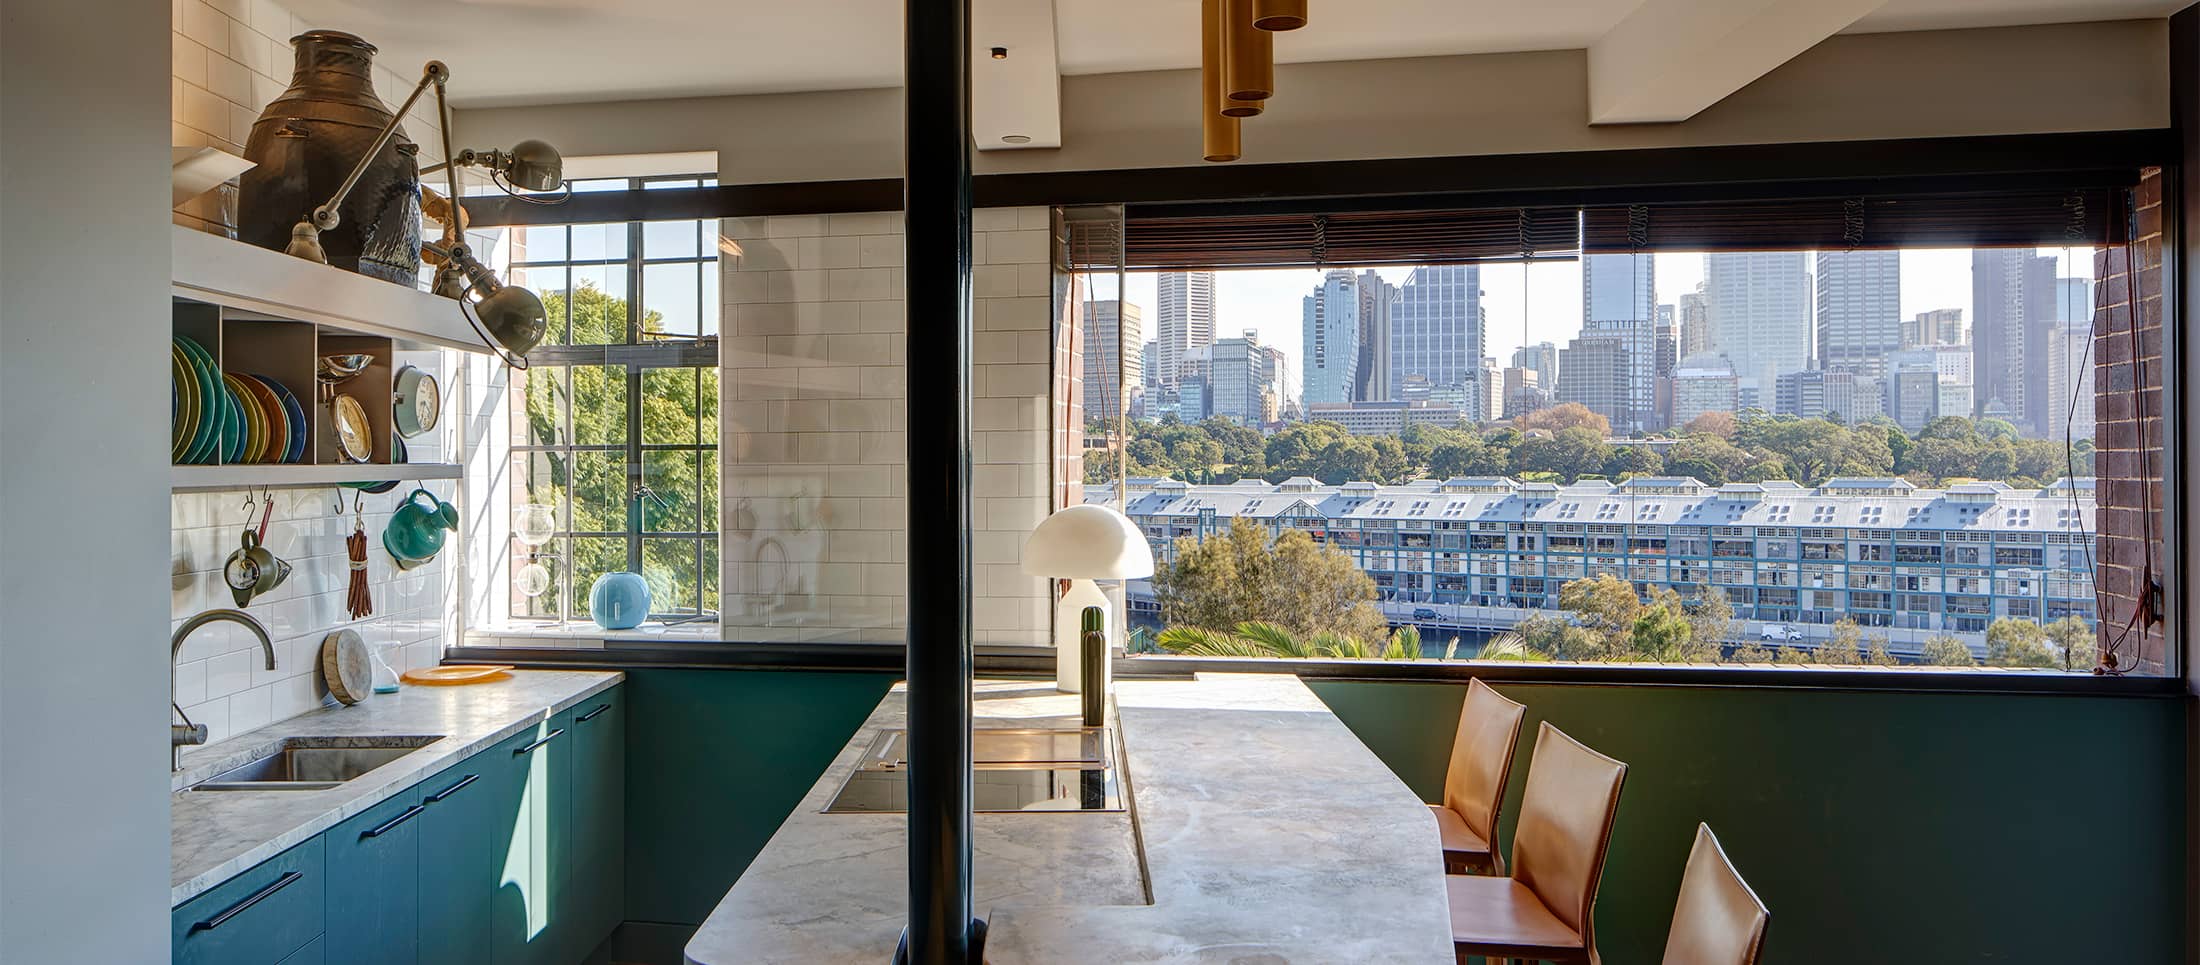 Weir Phillips Architects - Potts Point